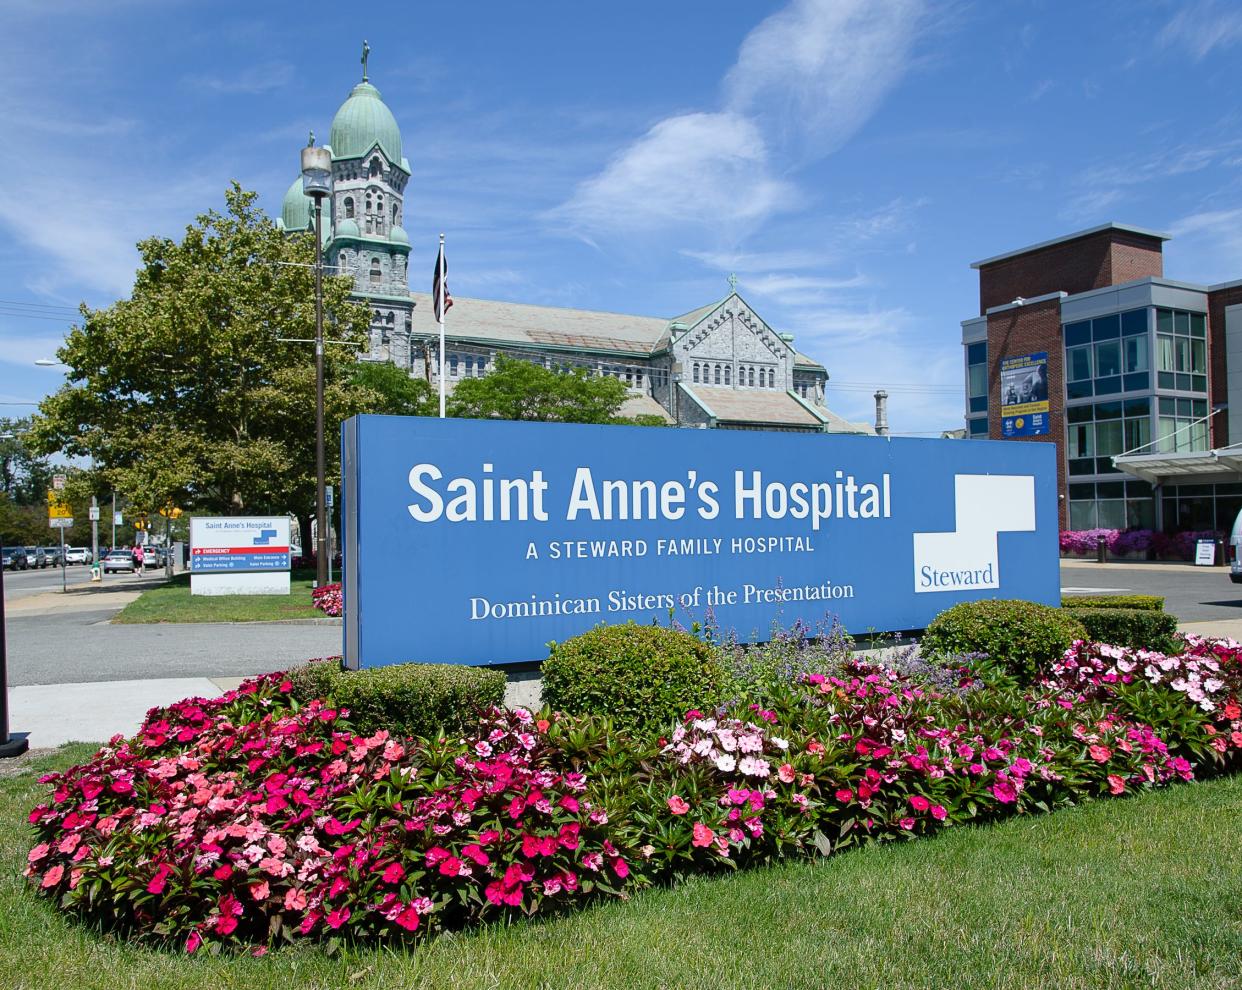 St. Anne's Hospital is located in Fall River